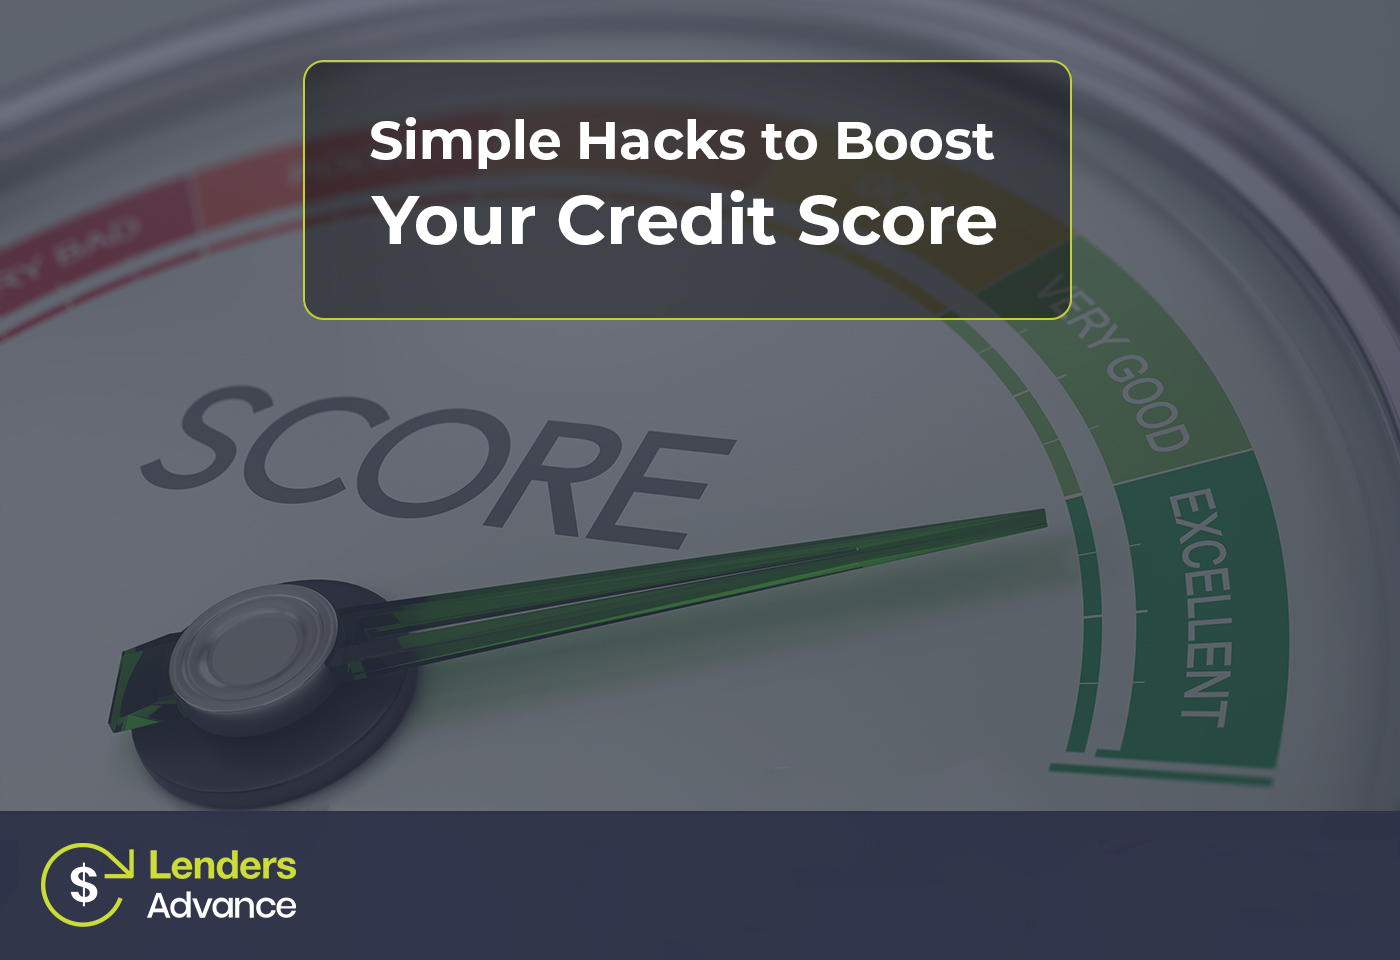 Simple Hacks to Boost Your Credit Score